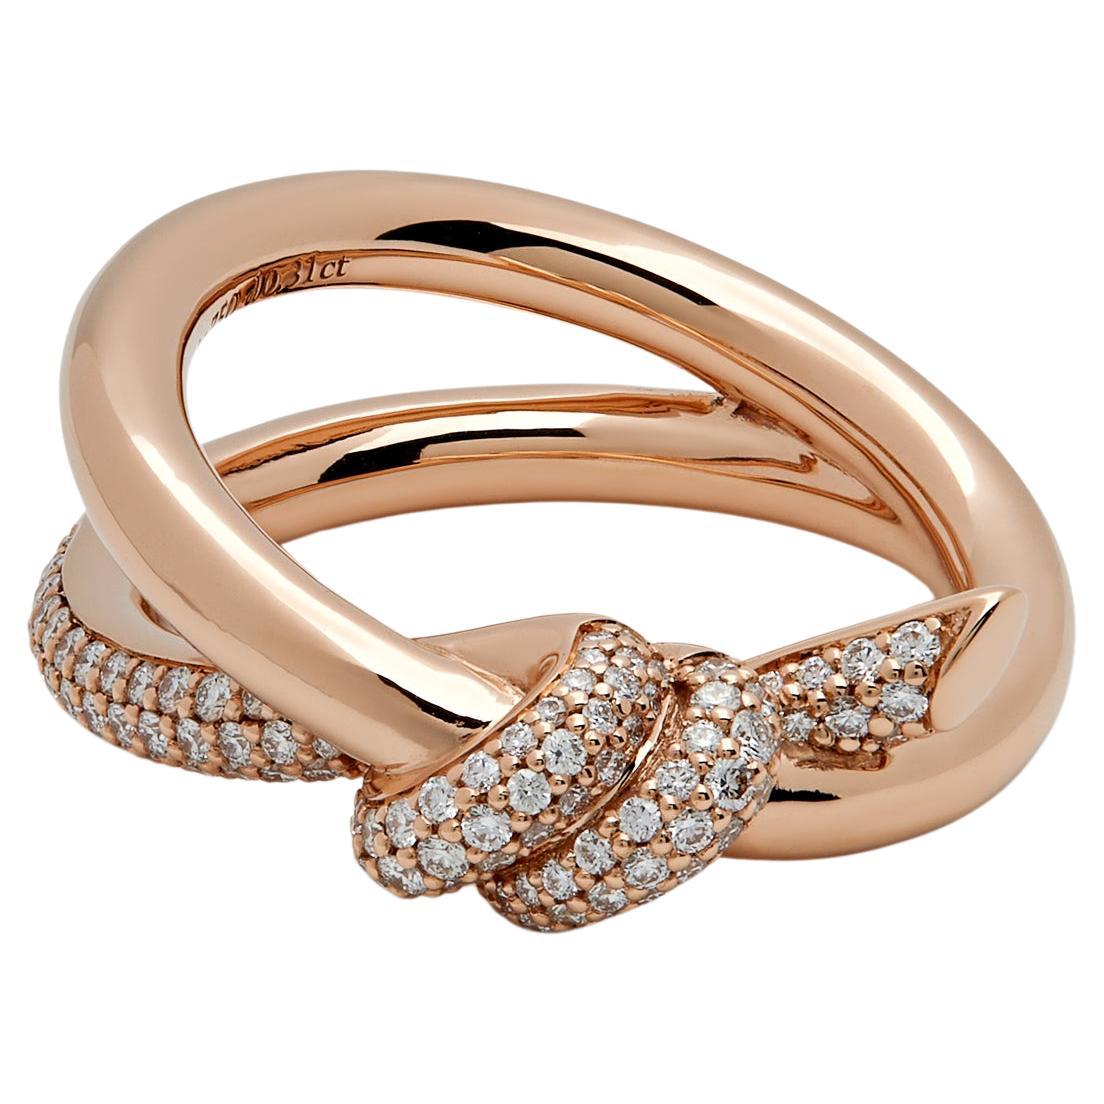 Tiffany & Co. Knot Double Row Ring in Rose Gold with Diamonds 69683304